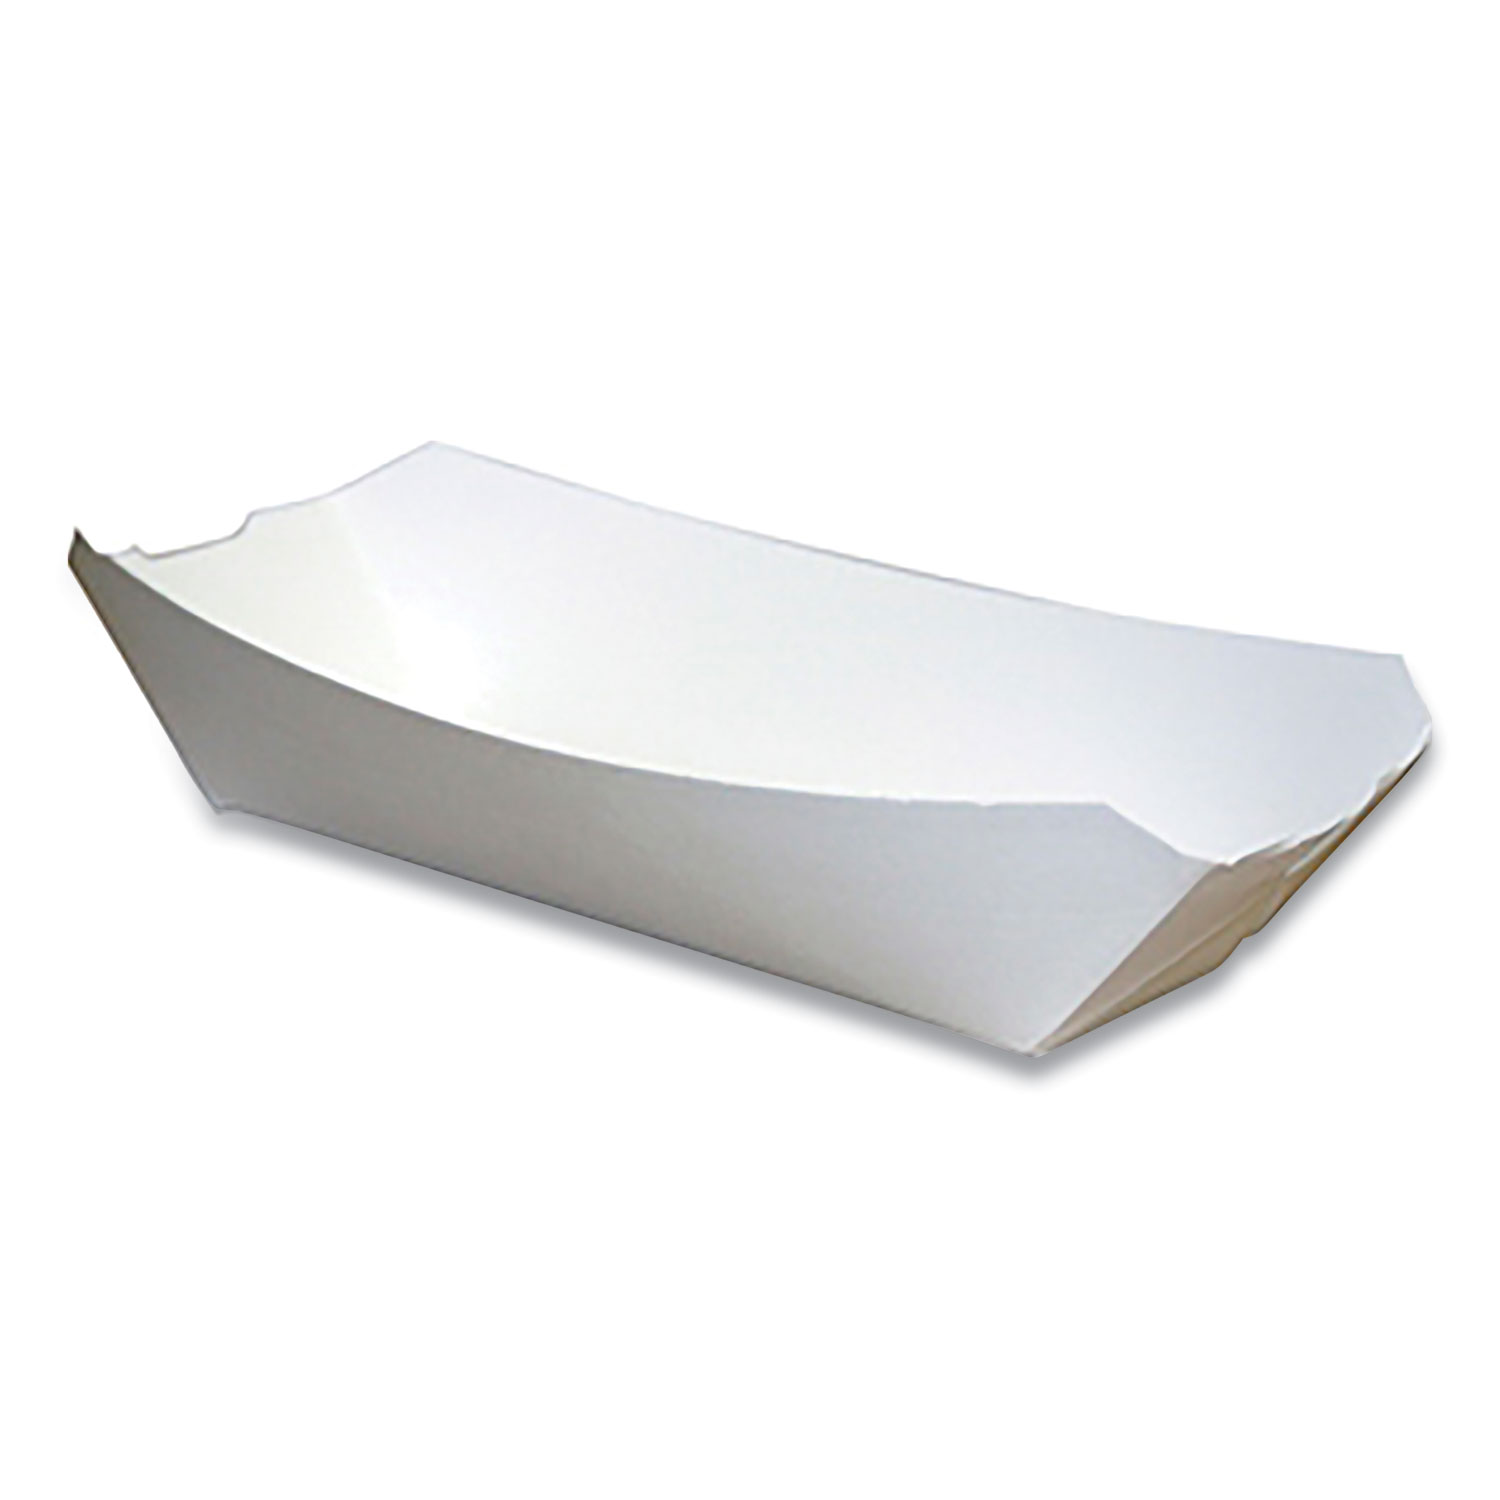  Pactiv 23863 Paperboard Food Trays, #12 Beers Tray, 6 x 4 x 1.5, White, 300/Carton (PCT23863) 